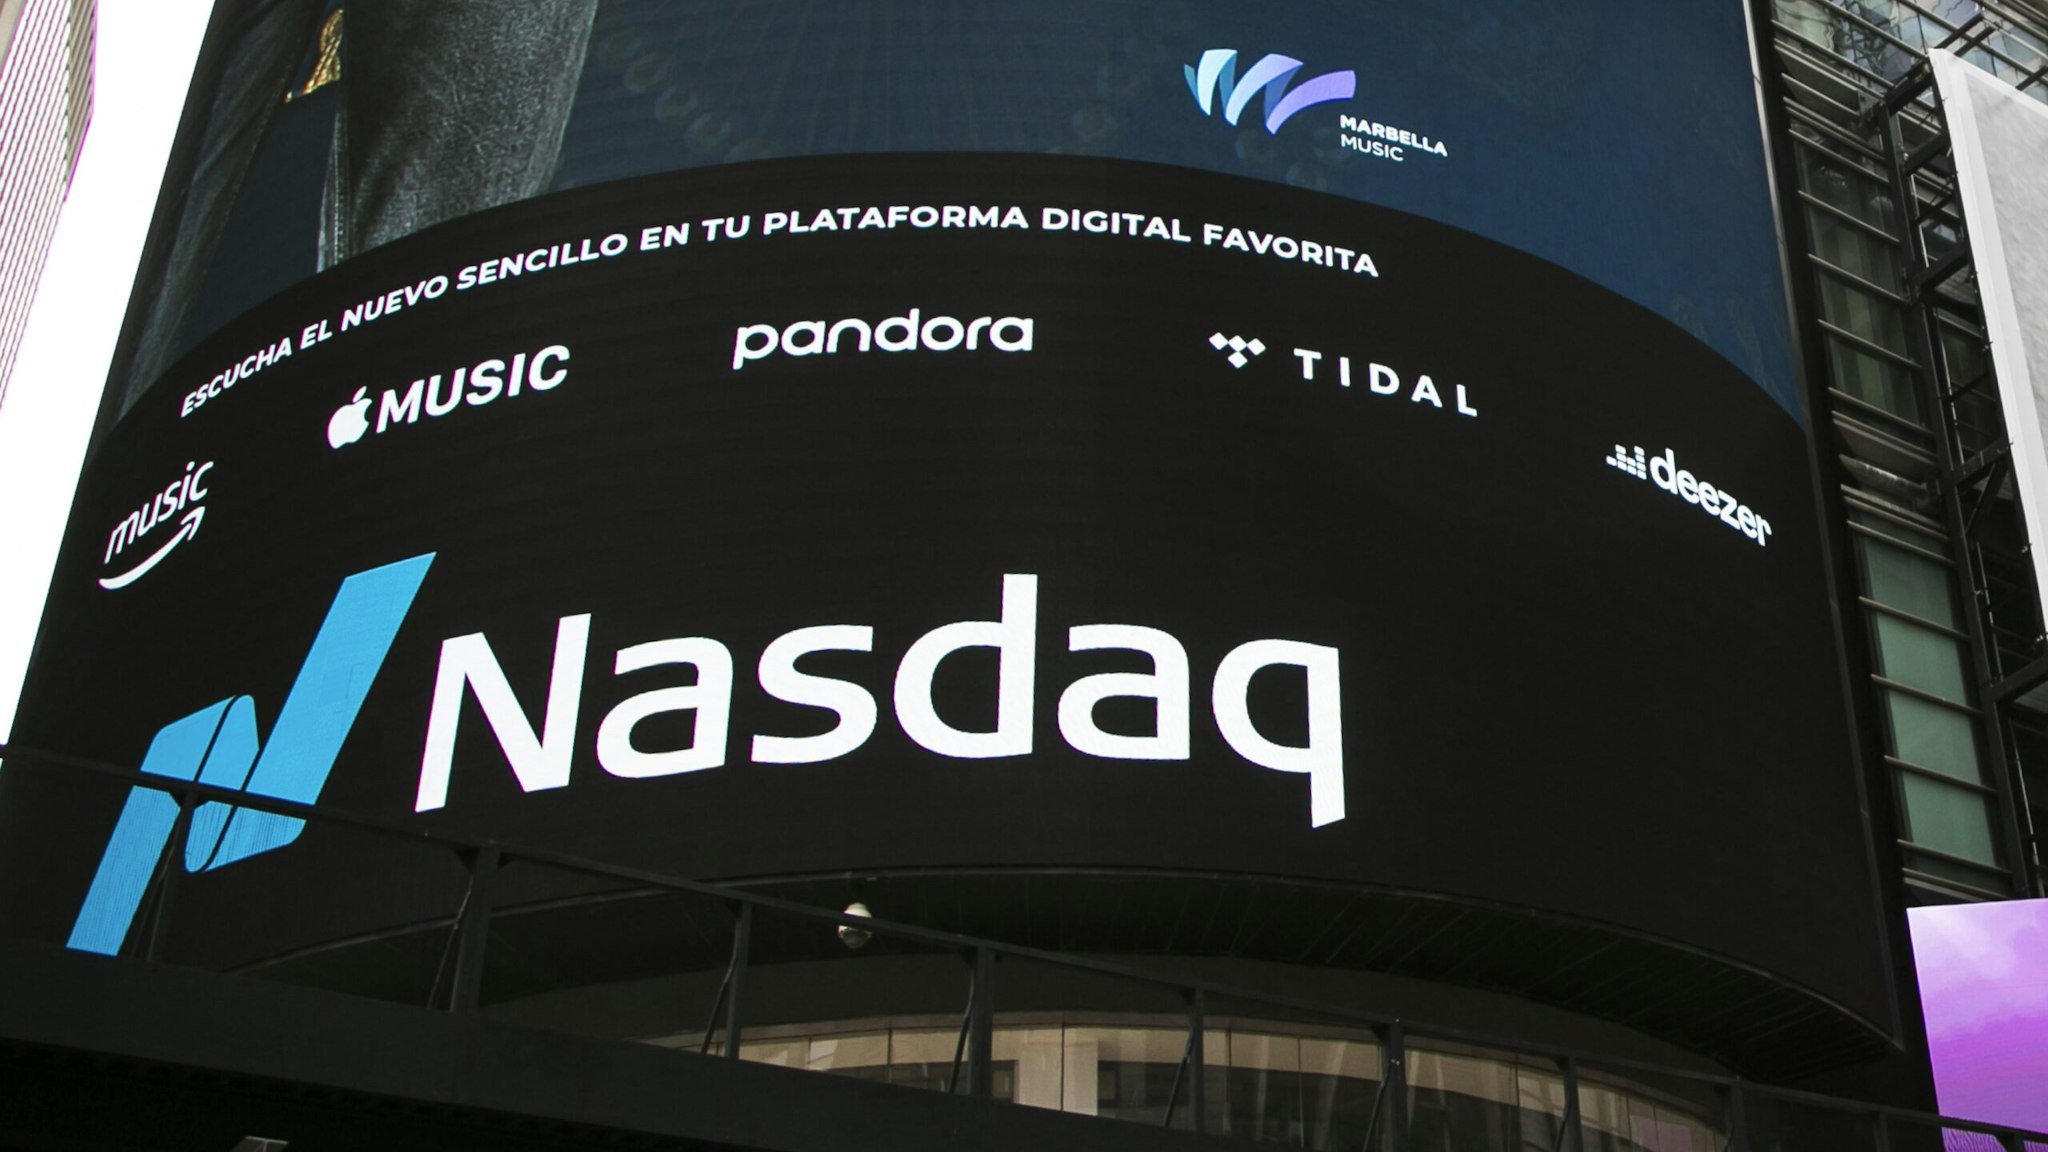 NEW YORK, NY - May 10: View of the Nasdaq Building in Times Square on May 10, 2021 in New York City. The Nasdaq company falls sharply as rising commodity prices renew concerns about rising inflation.